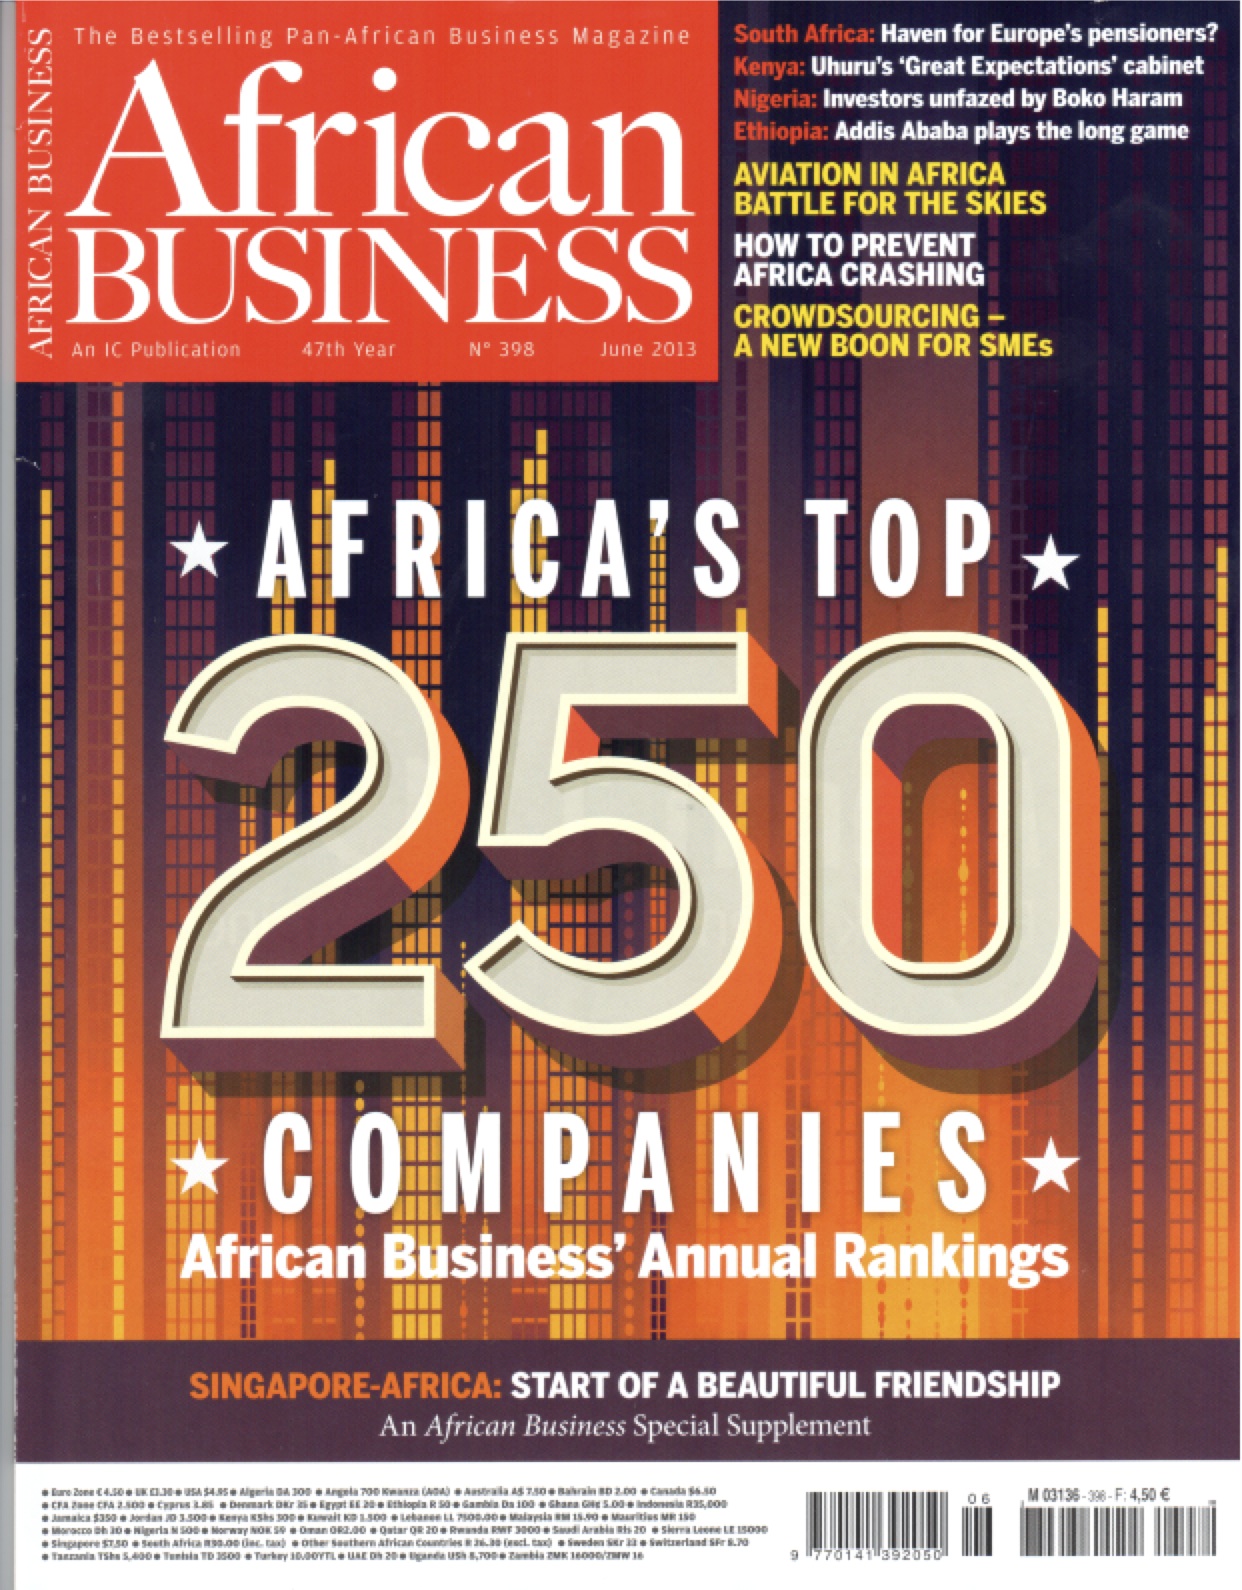 Kenya’s share of Africa’s Top 250 Companies 2020 Marketing Agency